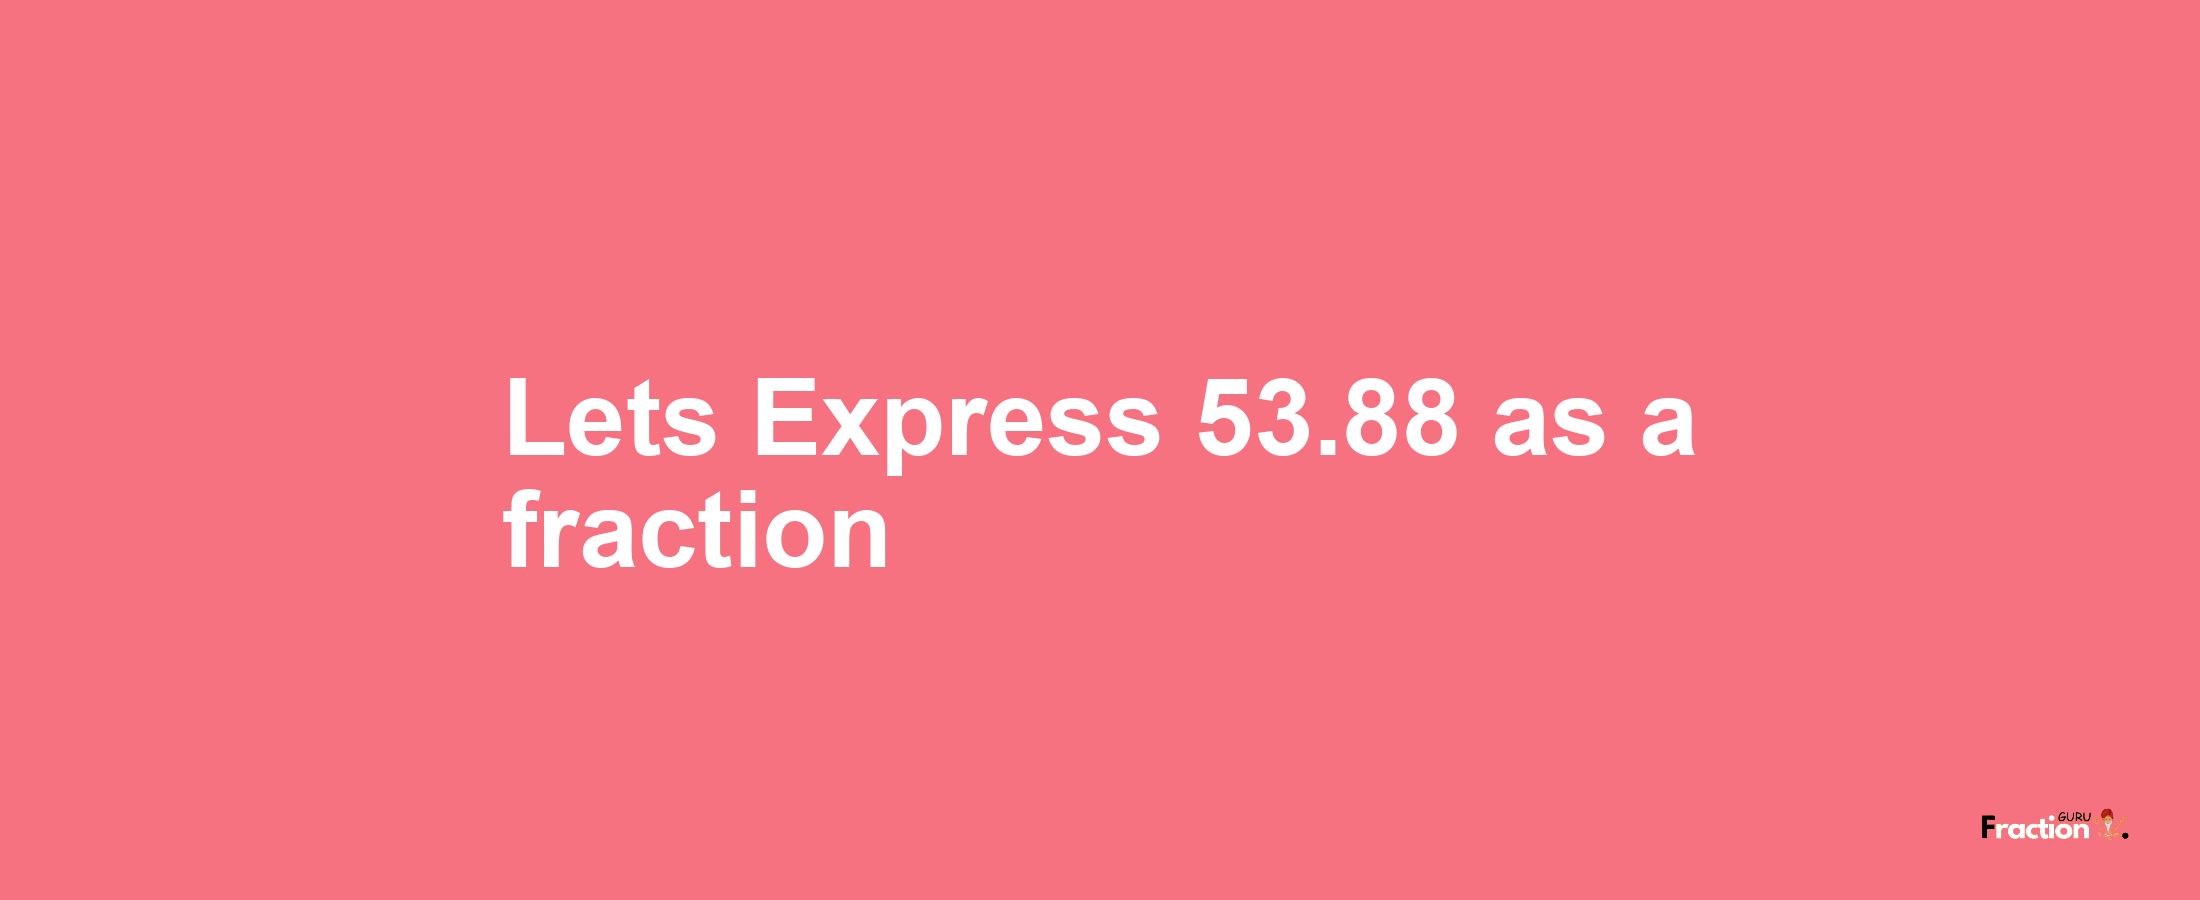 Lets Express 53.88 as afraction